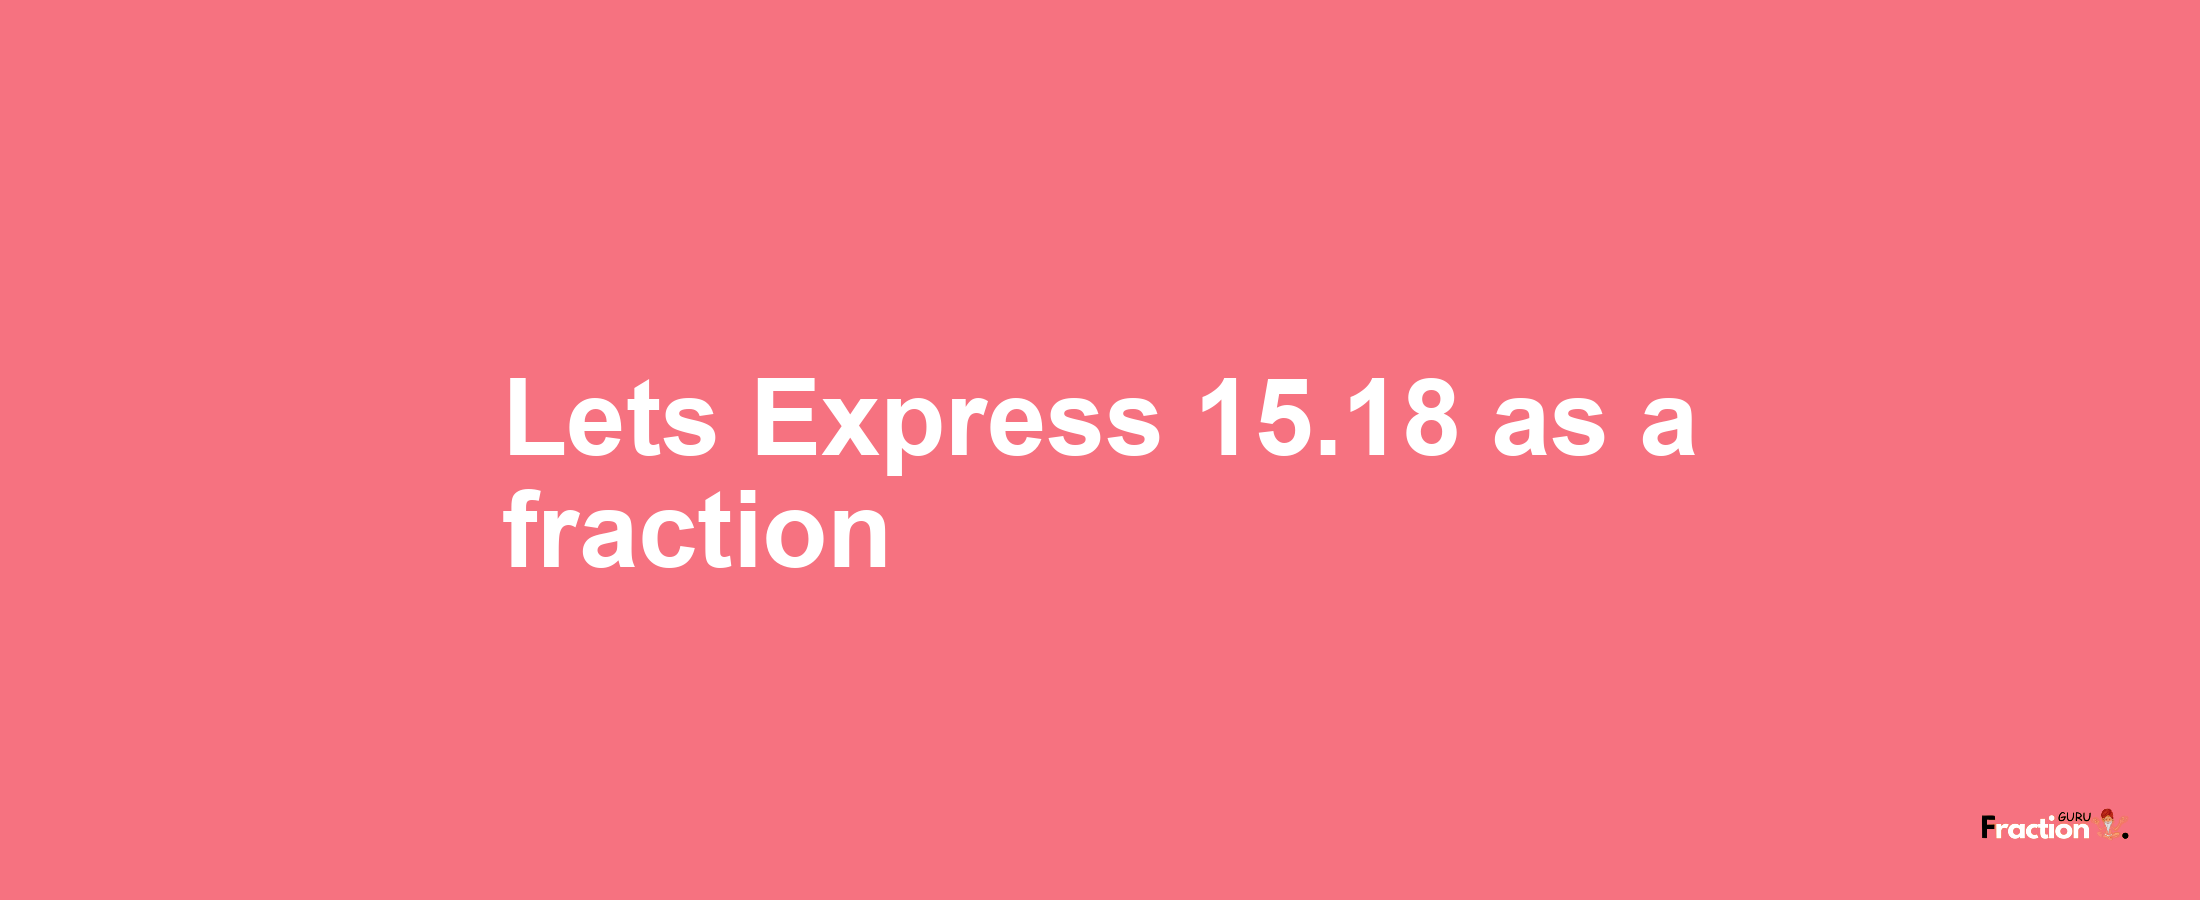 Lets Express 15.18 as afraction